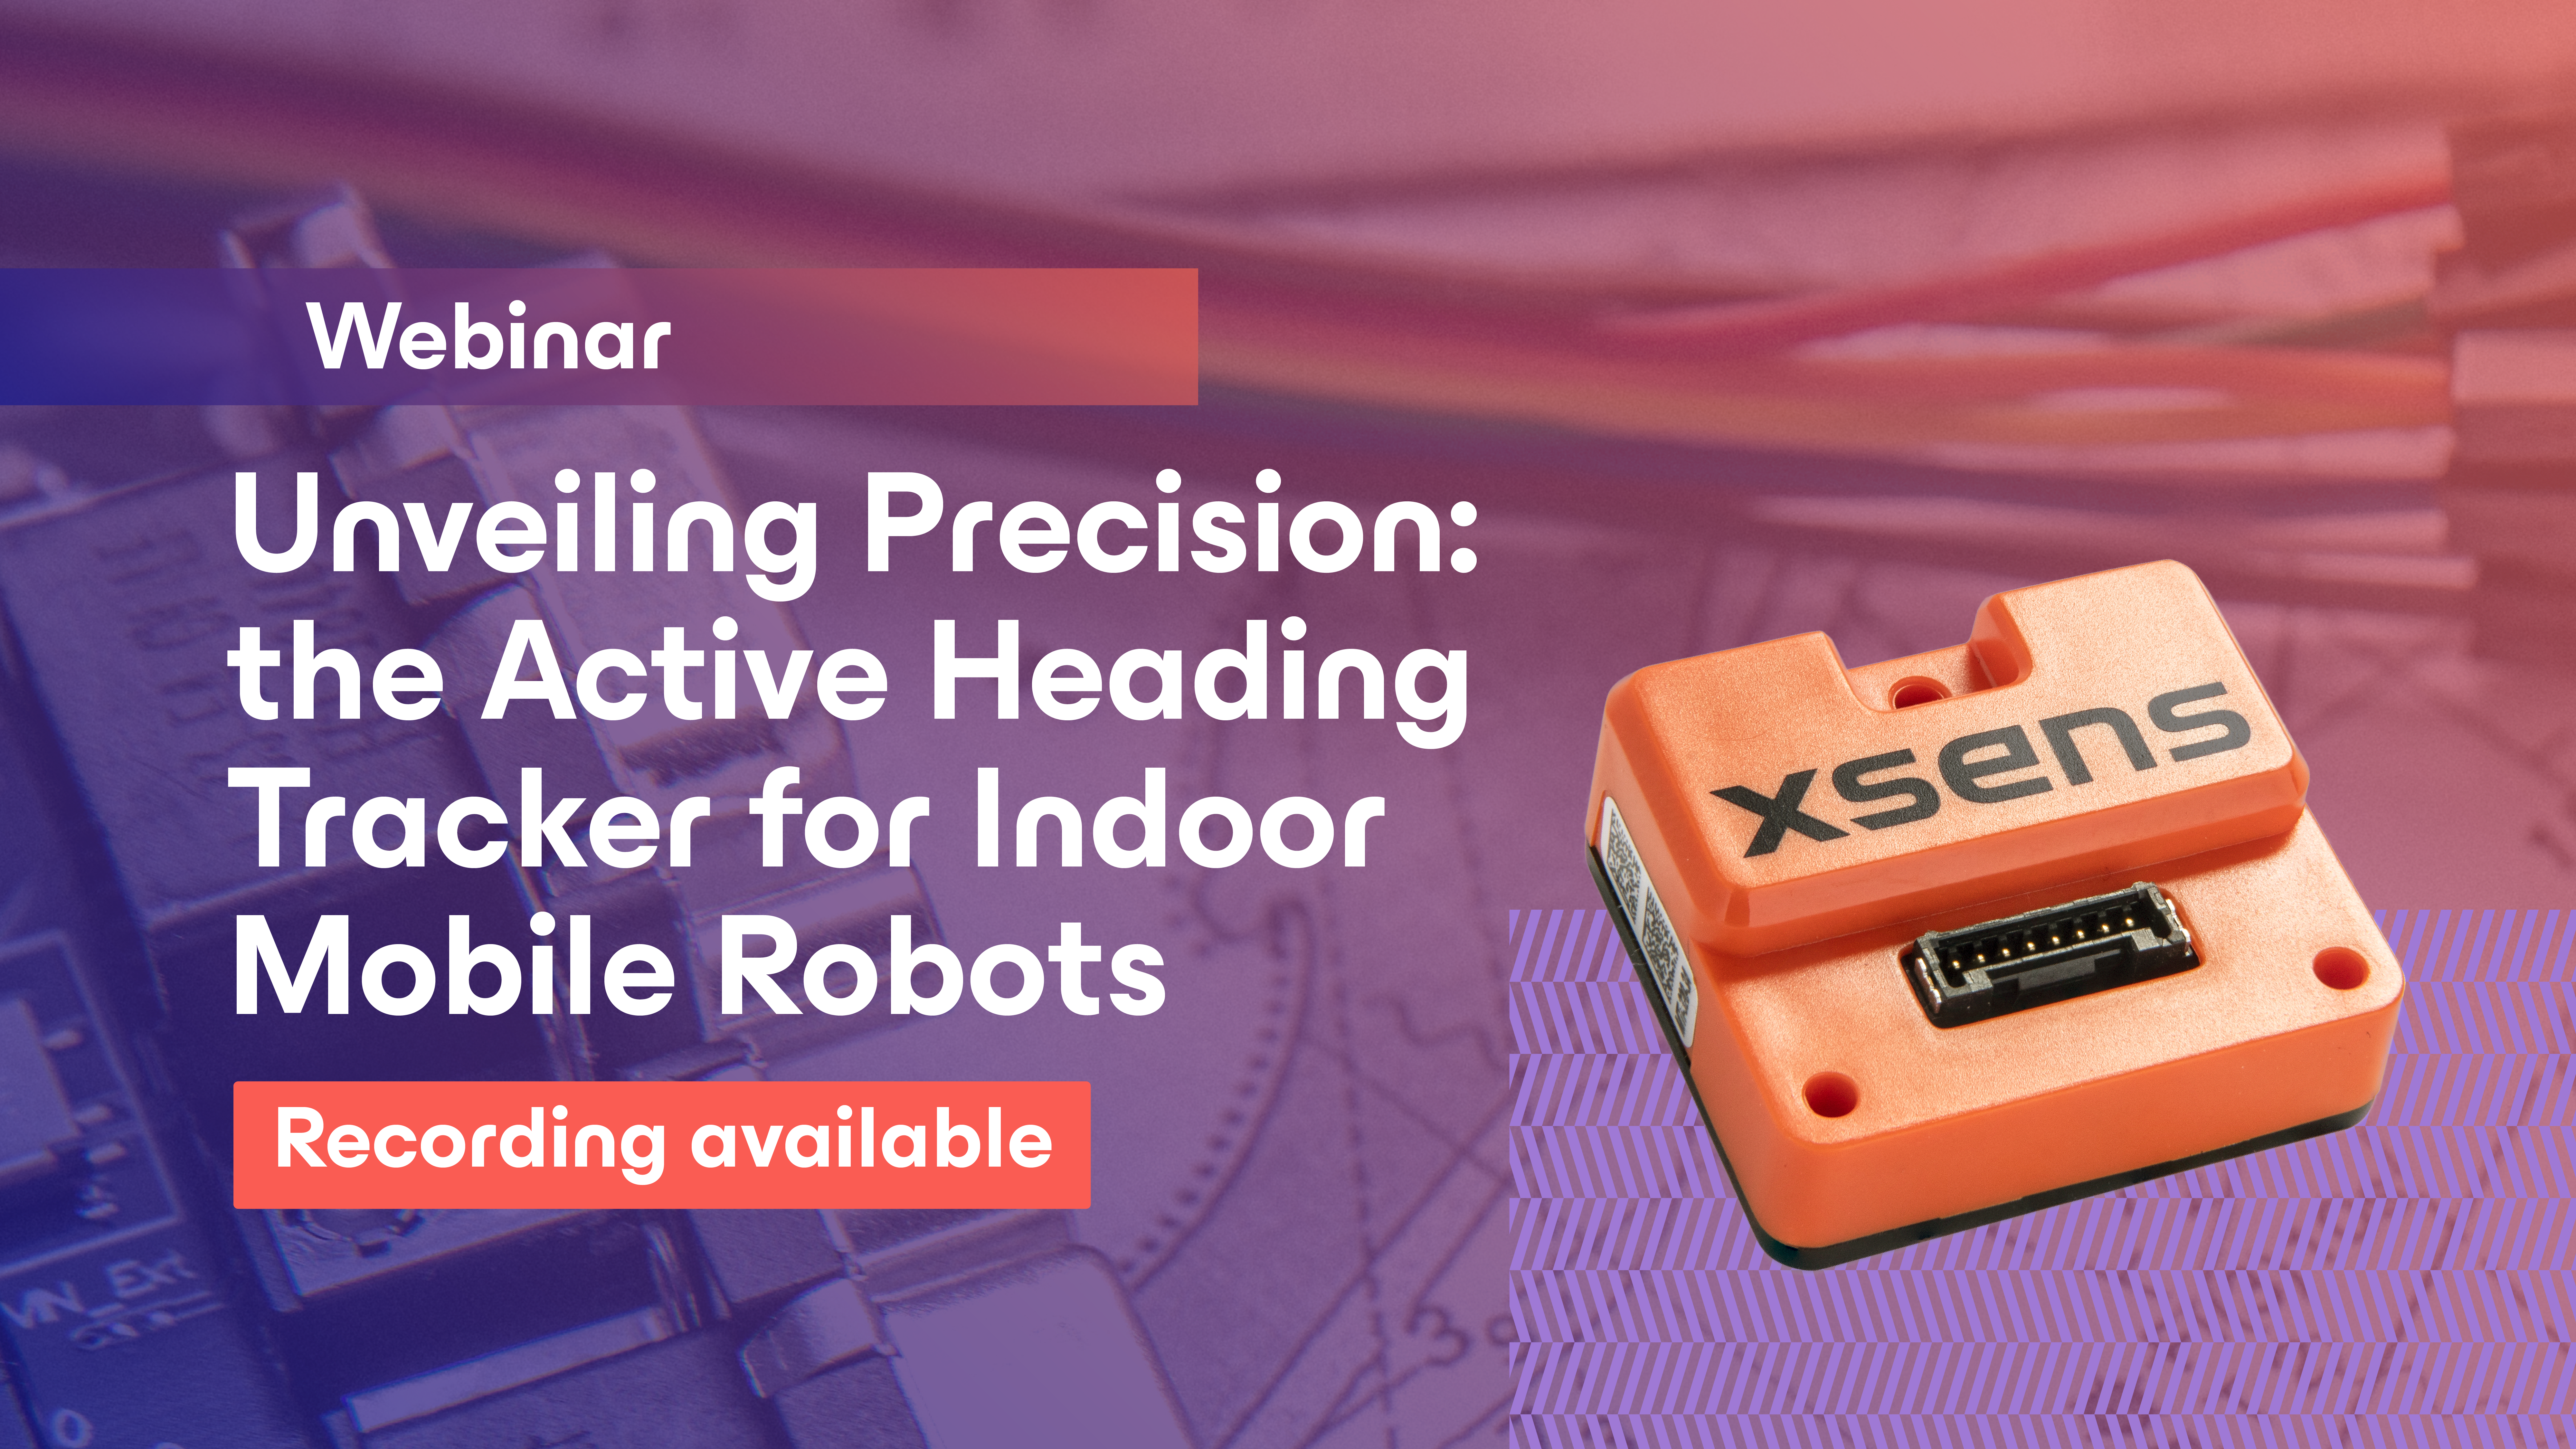 Unveiling Precision- the Active Heading Tracker for indoor mobile robots)recording available)no date